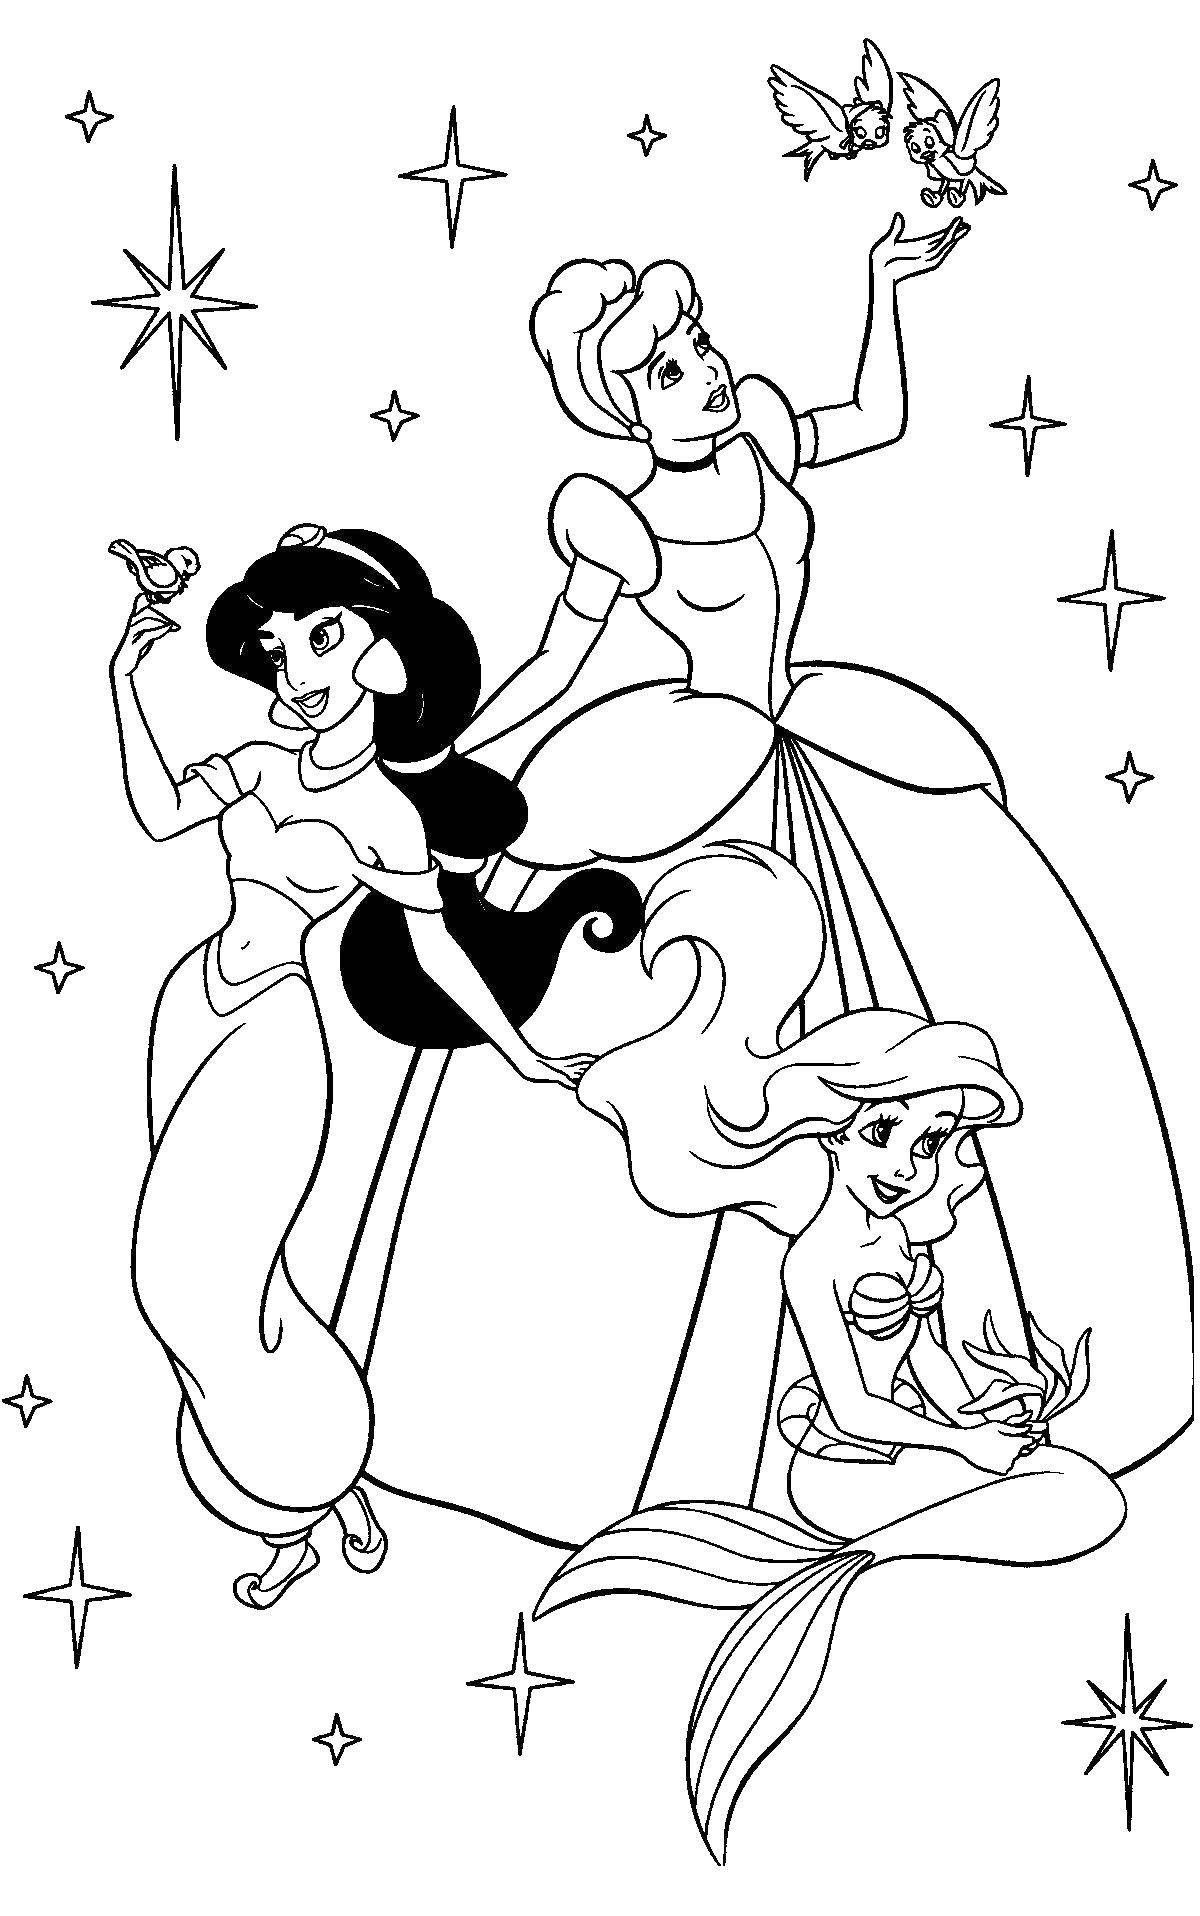 Coloring Cinderella, Ariel and Jasmine. Category coloring. Tags:  Disney, the little mermaid, Ariel.